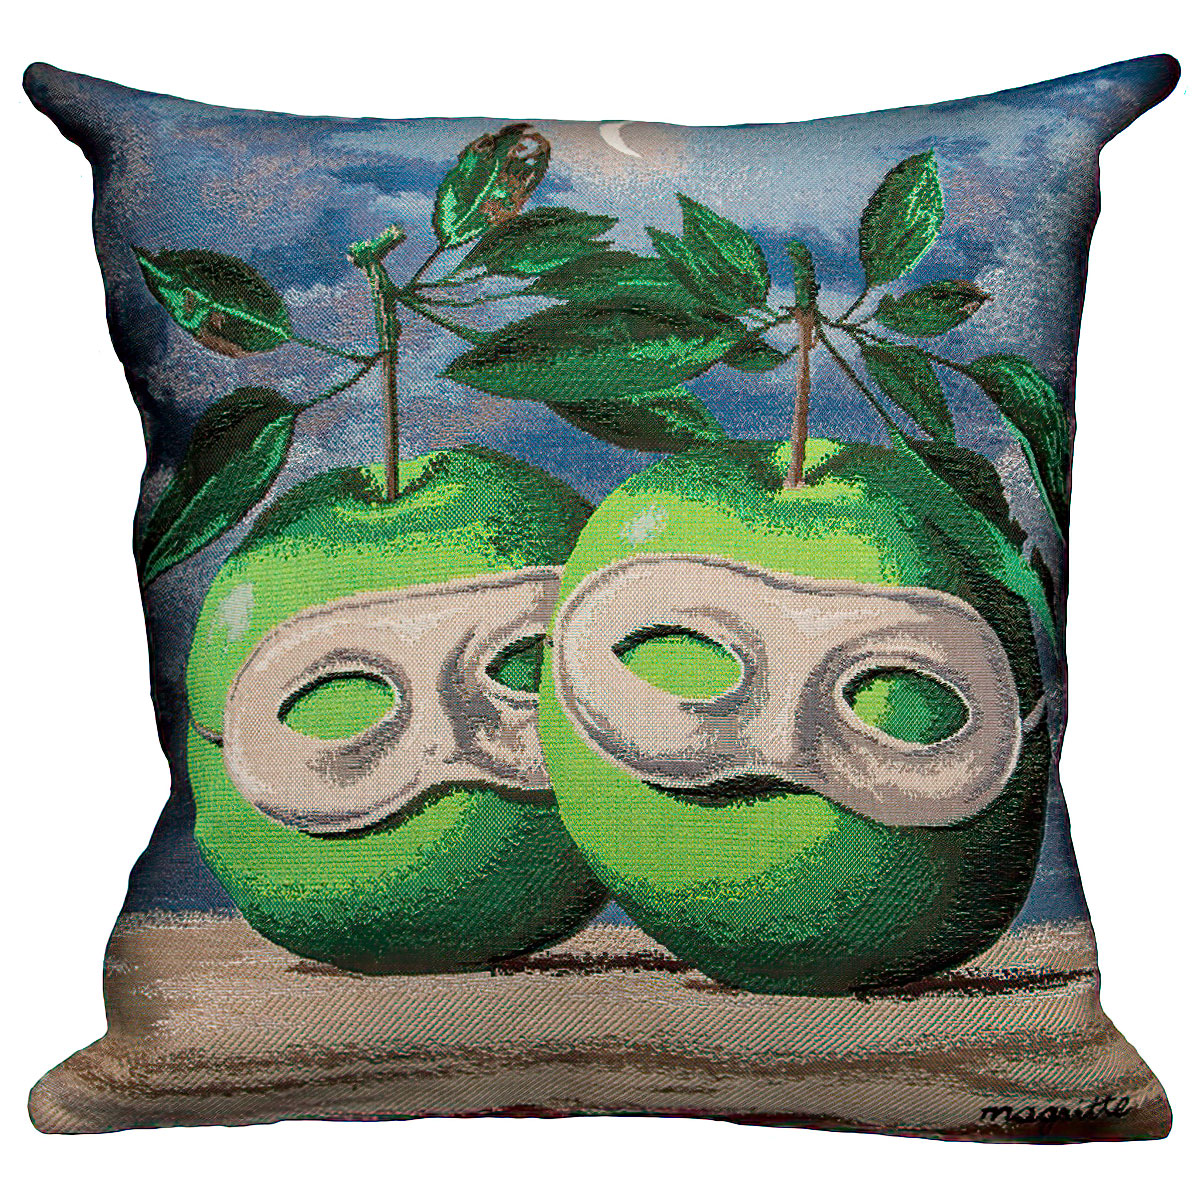 René Magritte Cushion cover : The masked apples (1967), made in France